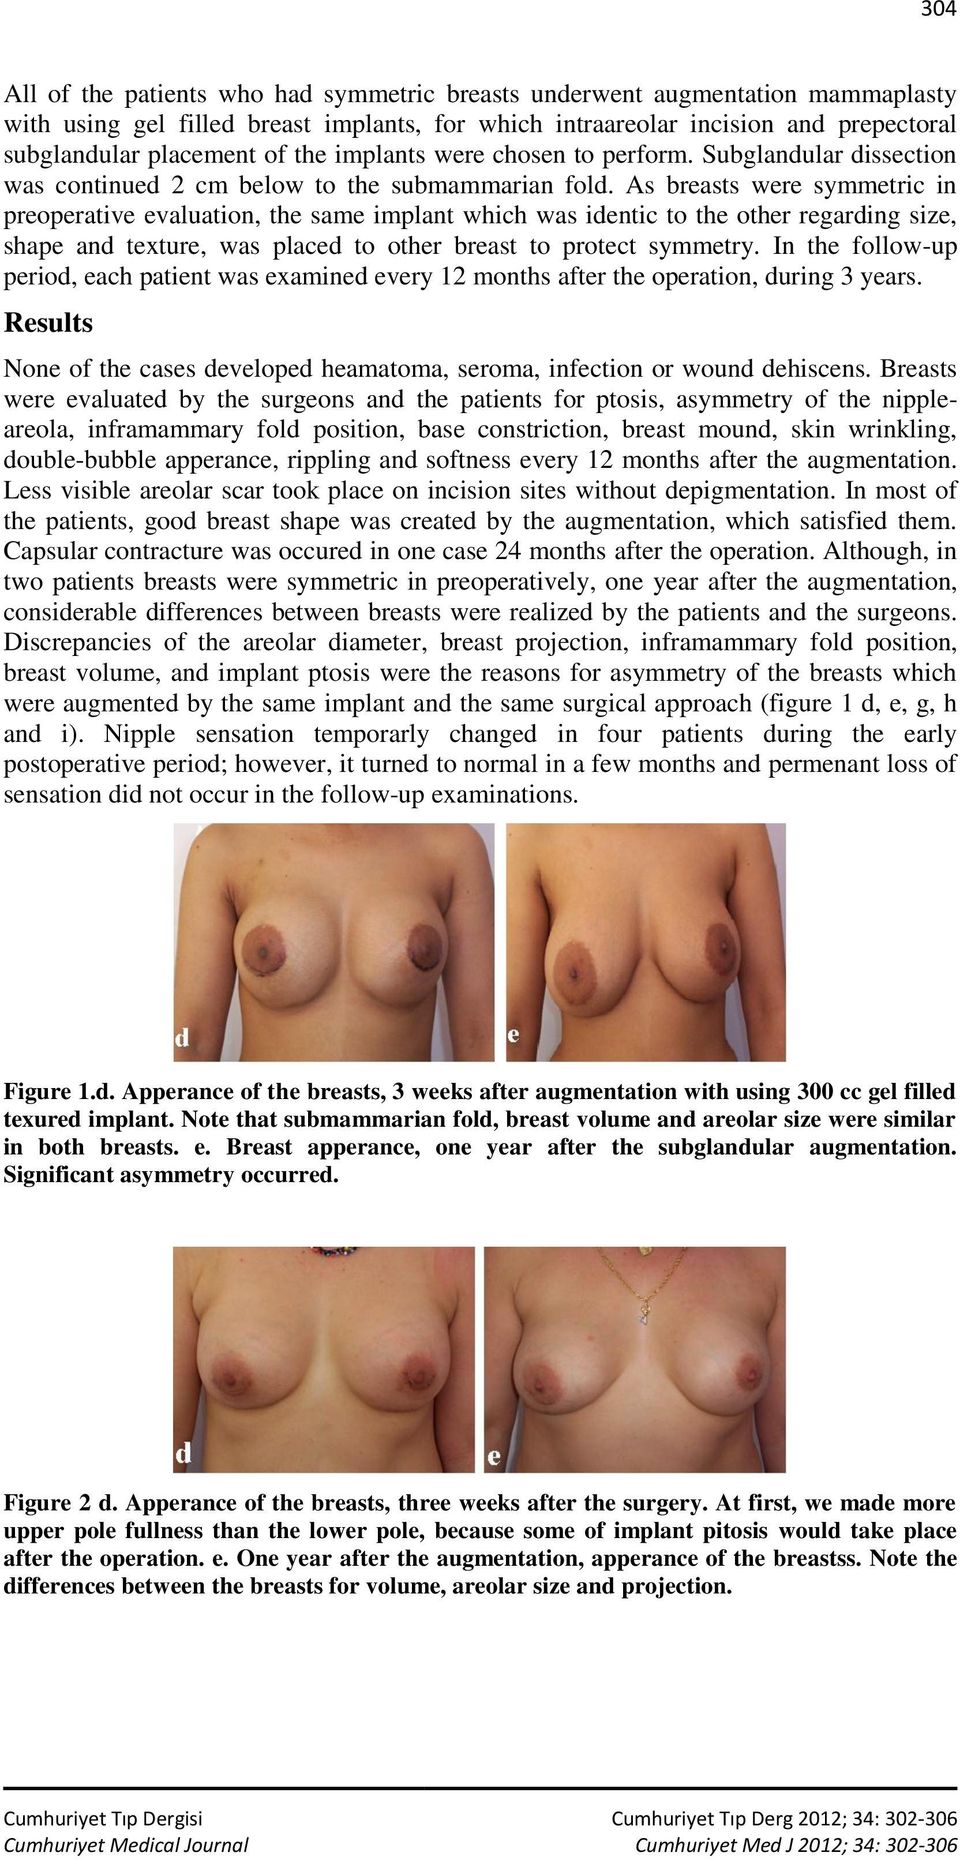 As breasts were symmetric in preoperative evaluation, the same implant which was identic to the other regarding size, shape and texture, was placed to other breast to protect symmetry.